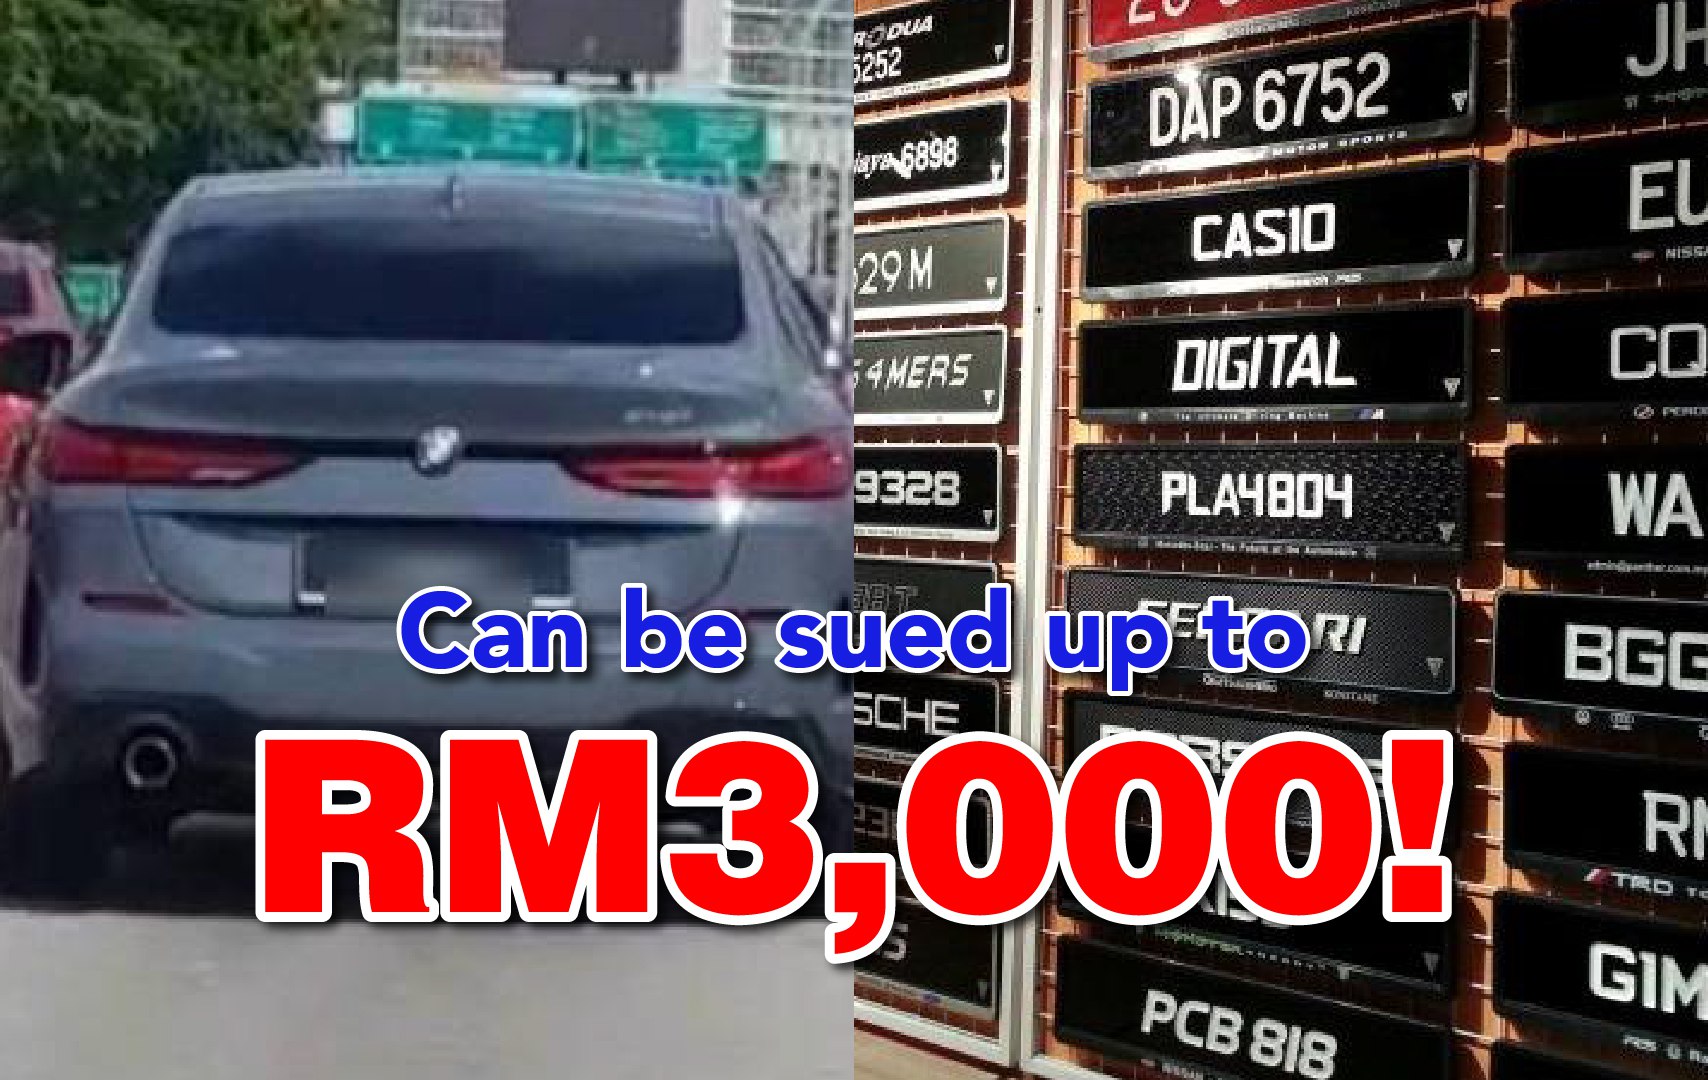 Summonsed for Using a 'Fancy' Number Plate, Here's What You Need